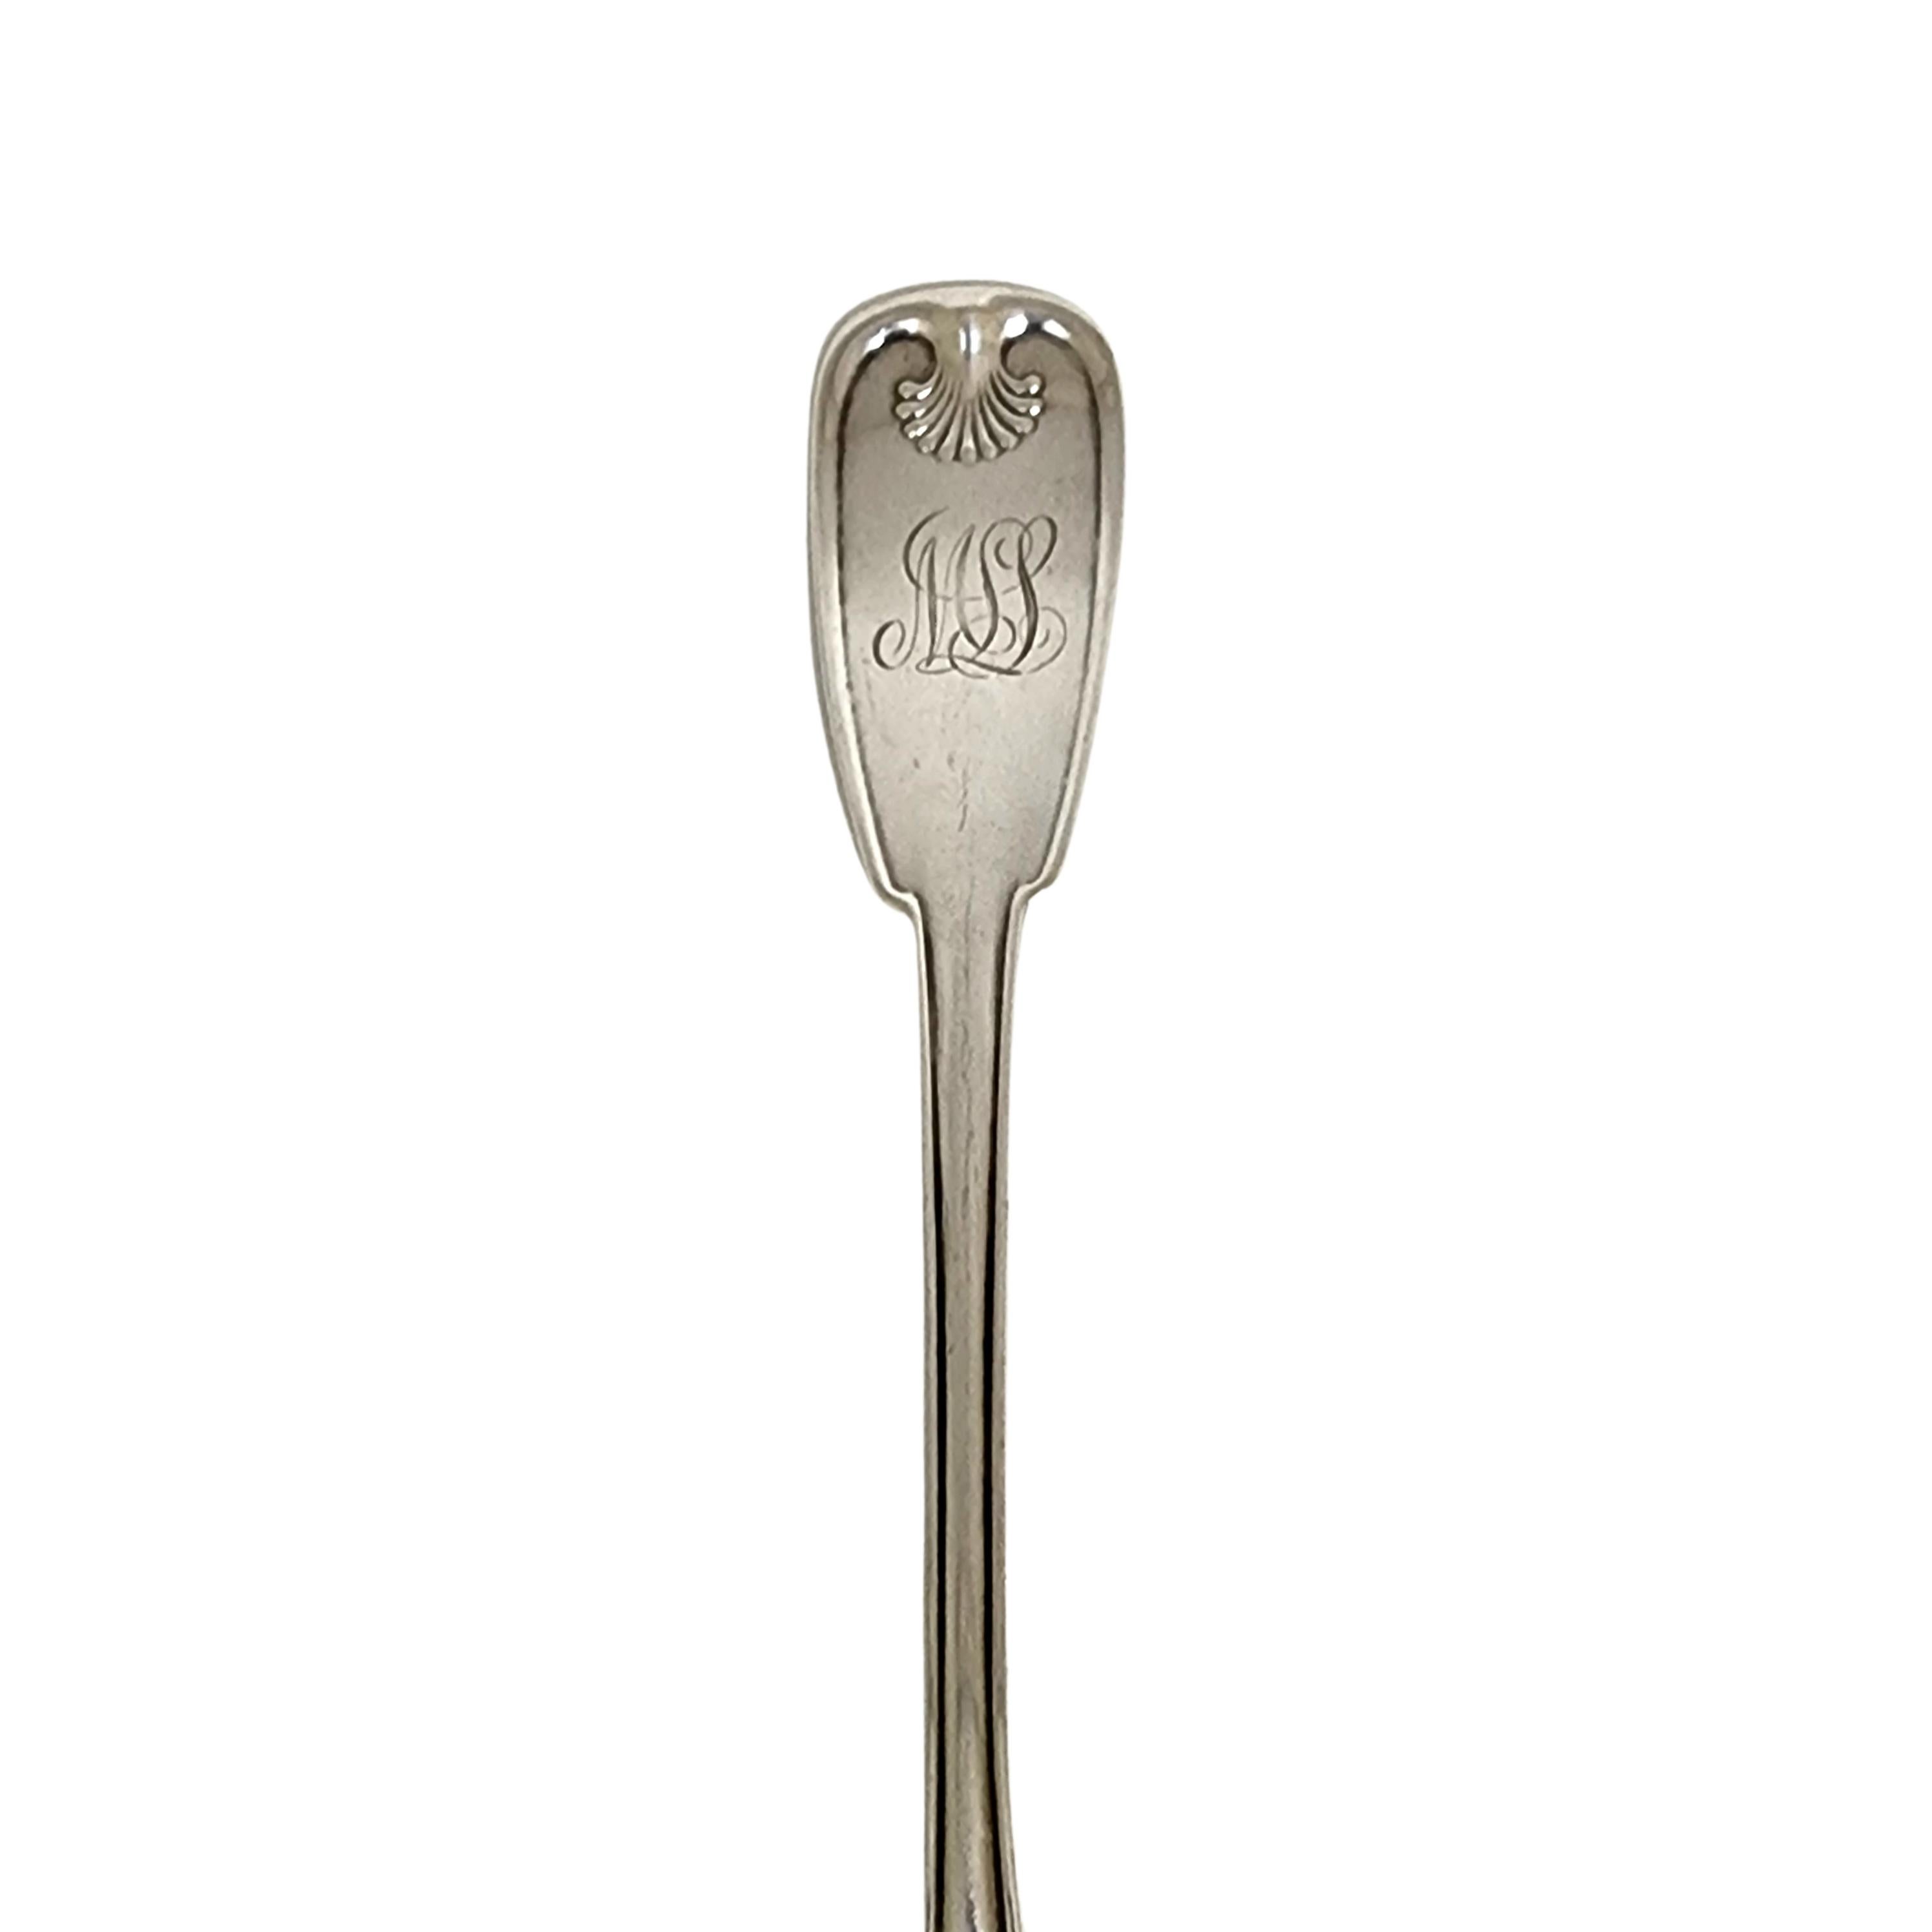 Tiffany & Co Palm Sterling Silver Tablespoon/Serving Spoon with Monogram #12568 In Good Condition For Sale In Washington Depot, CT